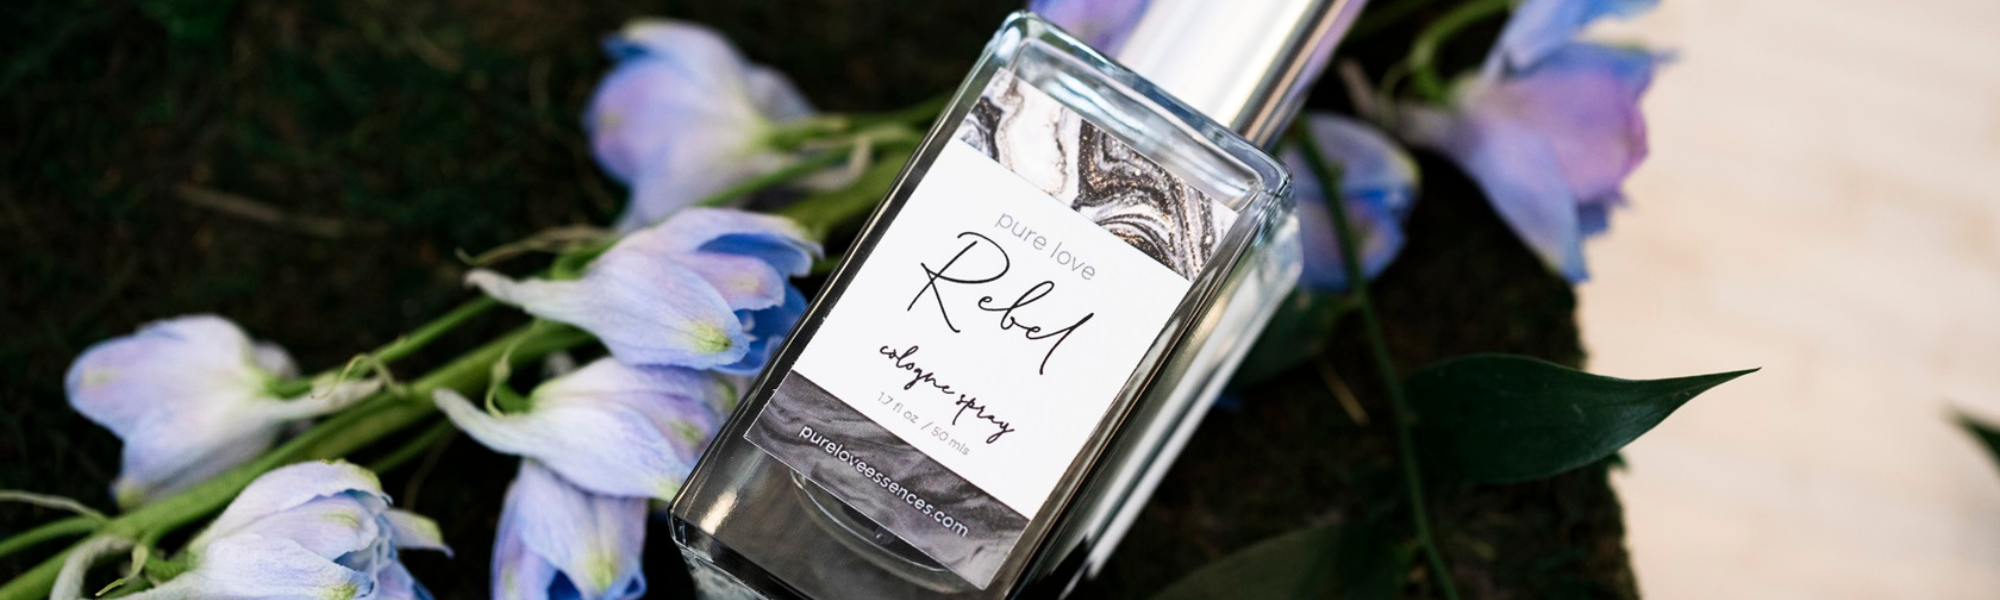 Signature wedding day scent by Pure Love Essence, Rebel essential oil cologne.